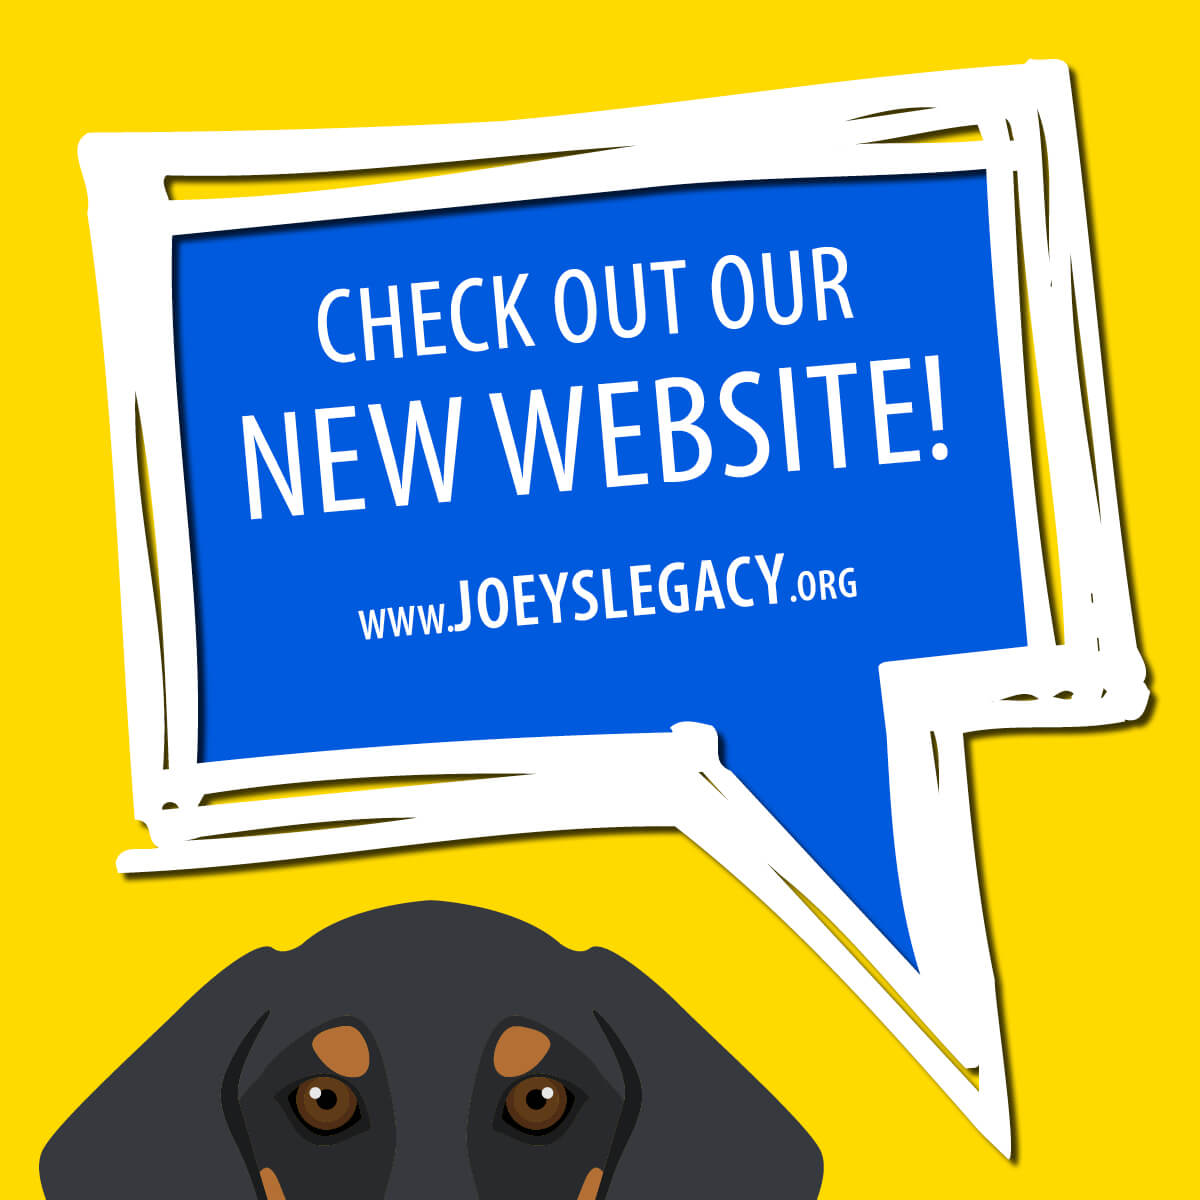 Joey's Legacy Social Media Post Check Out Our New Website. www.joeyslegacy.org